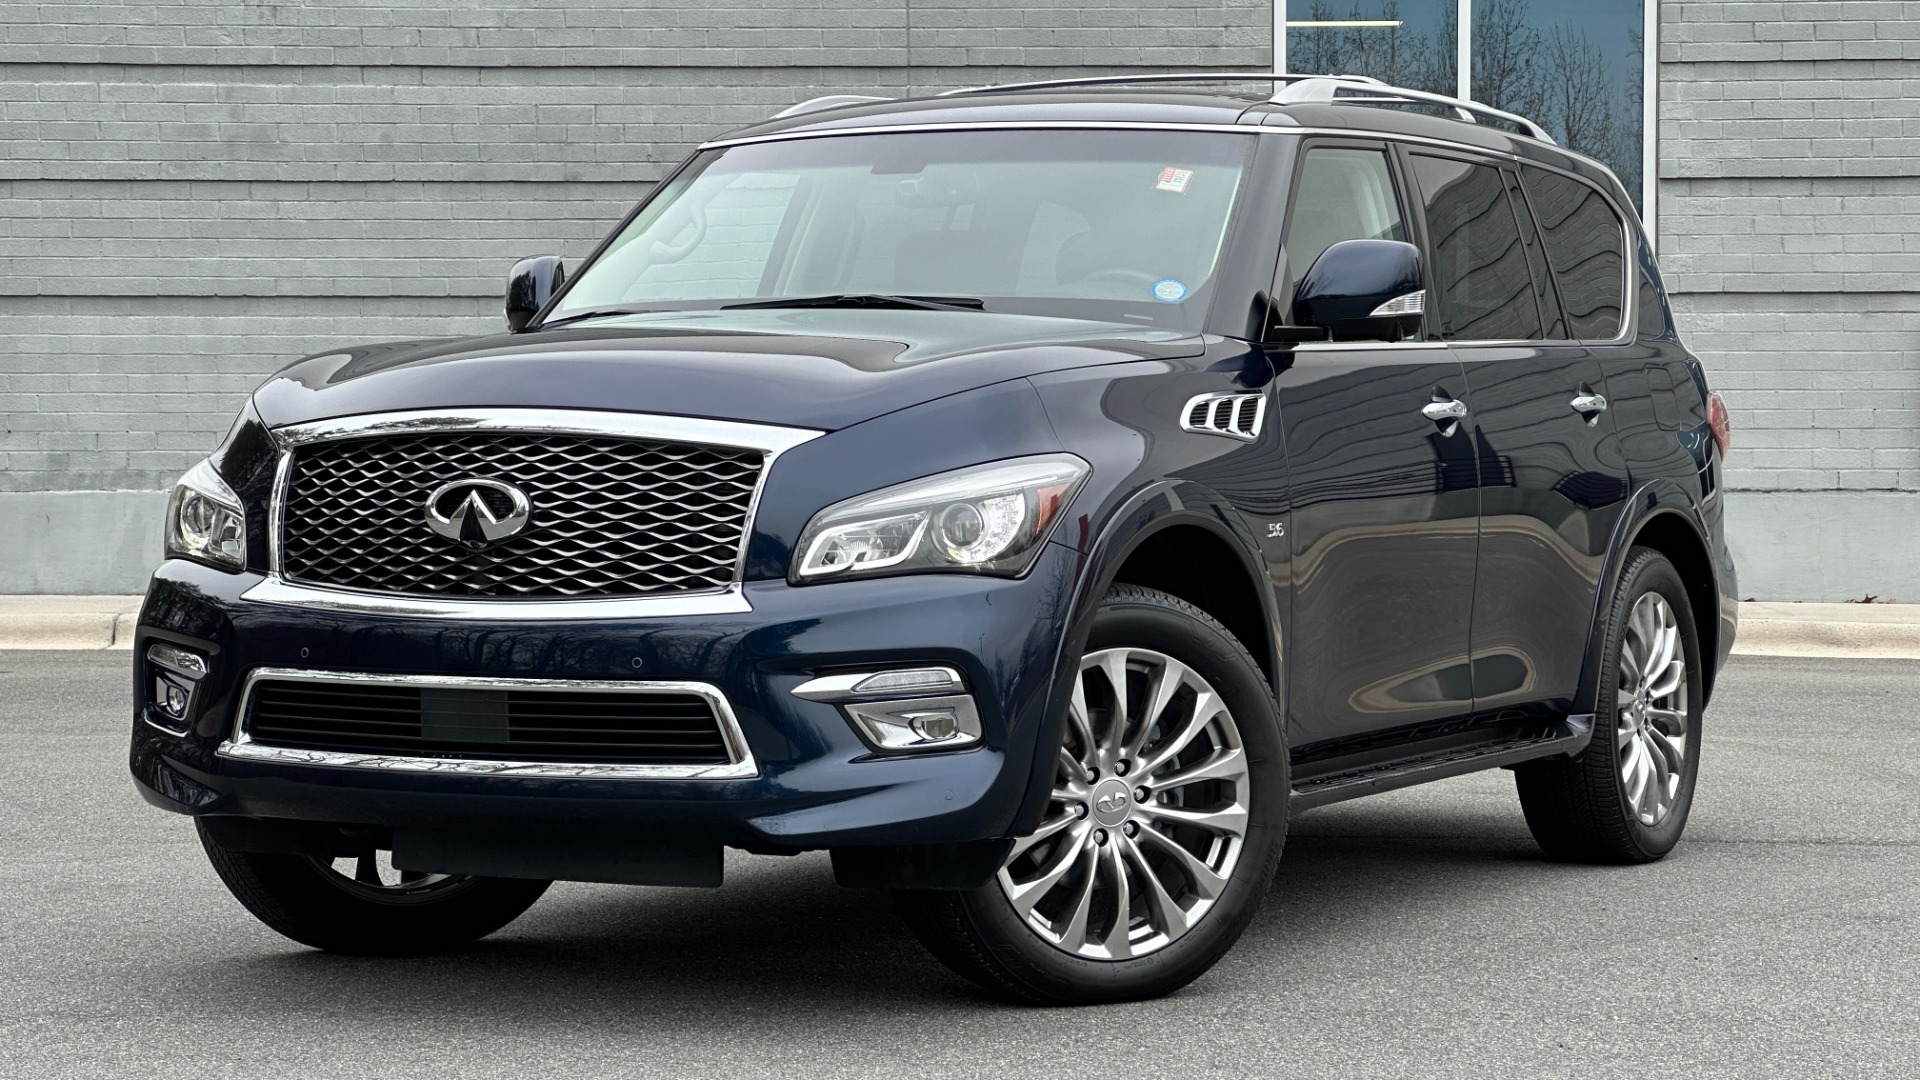 Used 2016 INFINITI QX80 LIMITED / 22IN WHEELS / THEATER PACKAGE / DRIVER ASSISTANCE / V8 / 4WD for sale $33,995 at Formula Imports in Charlotte NC 28227 1